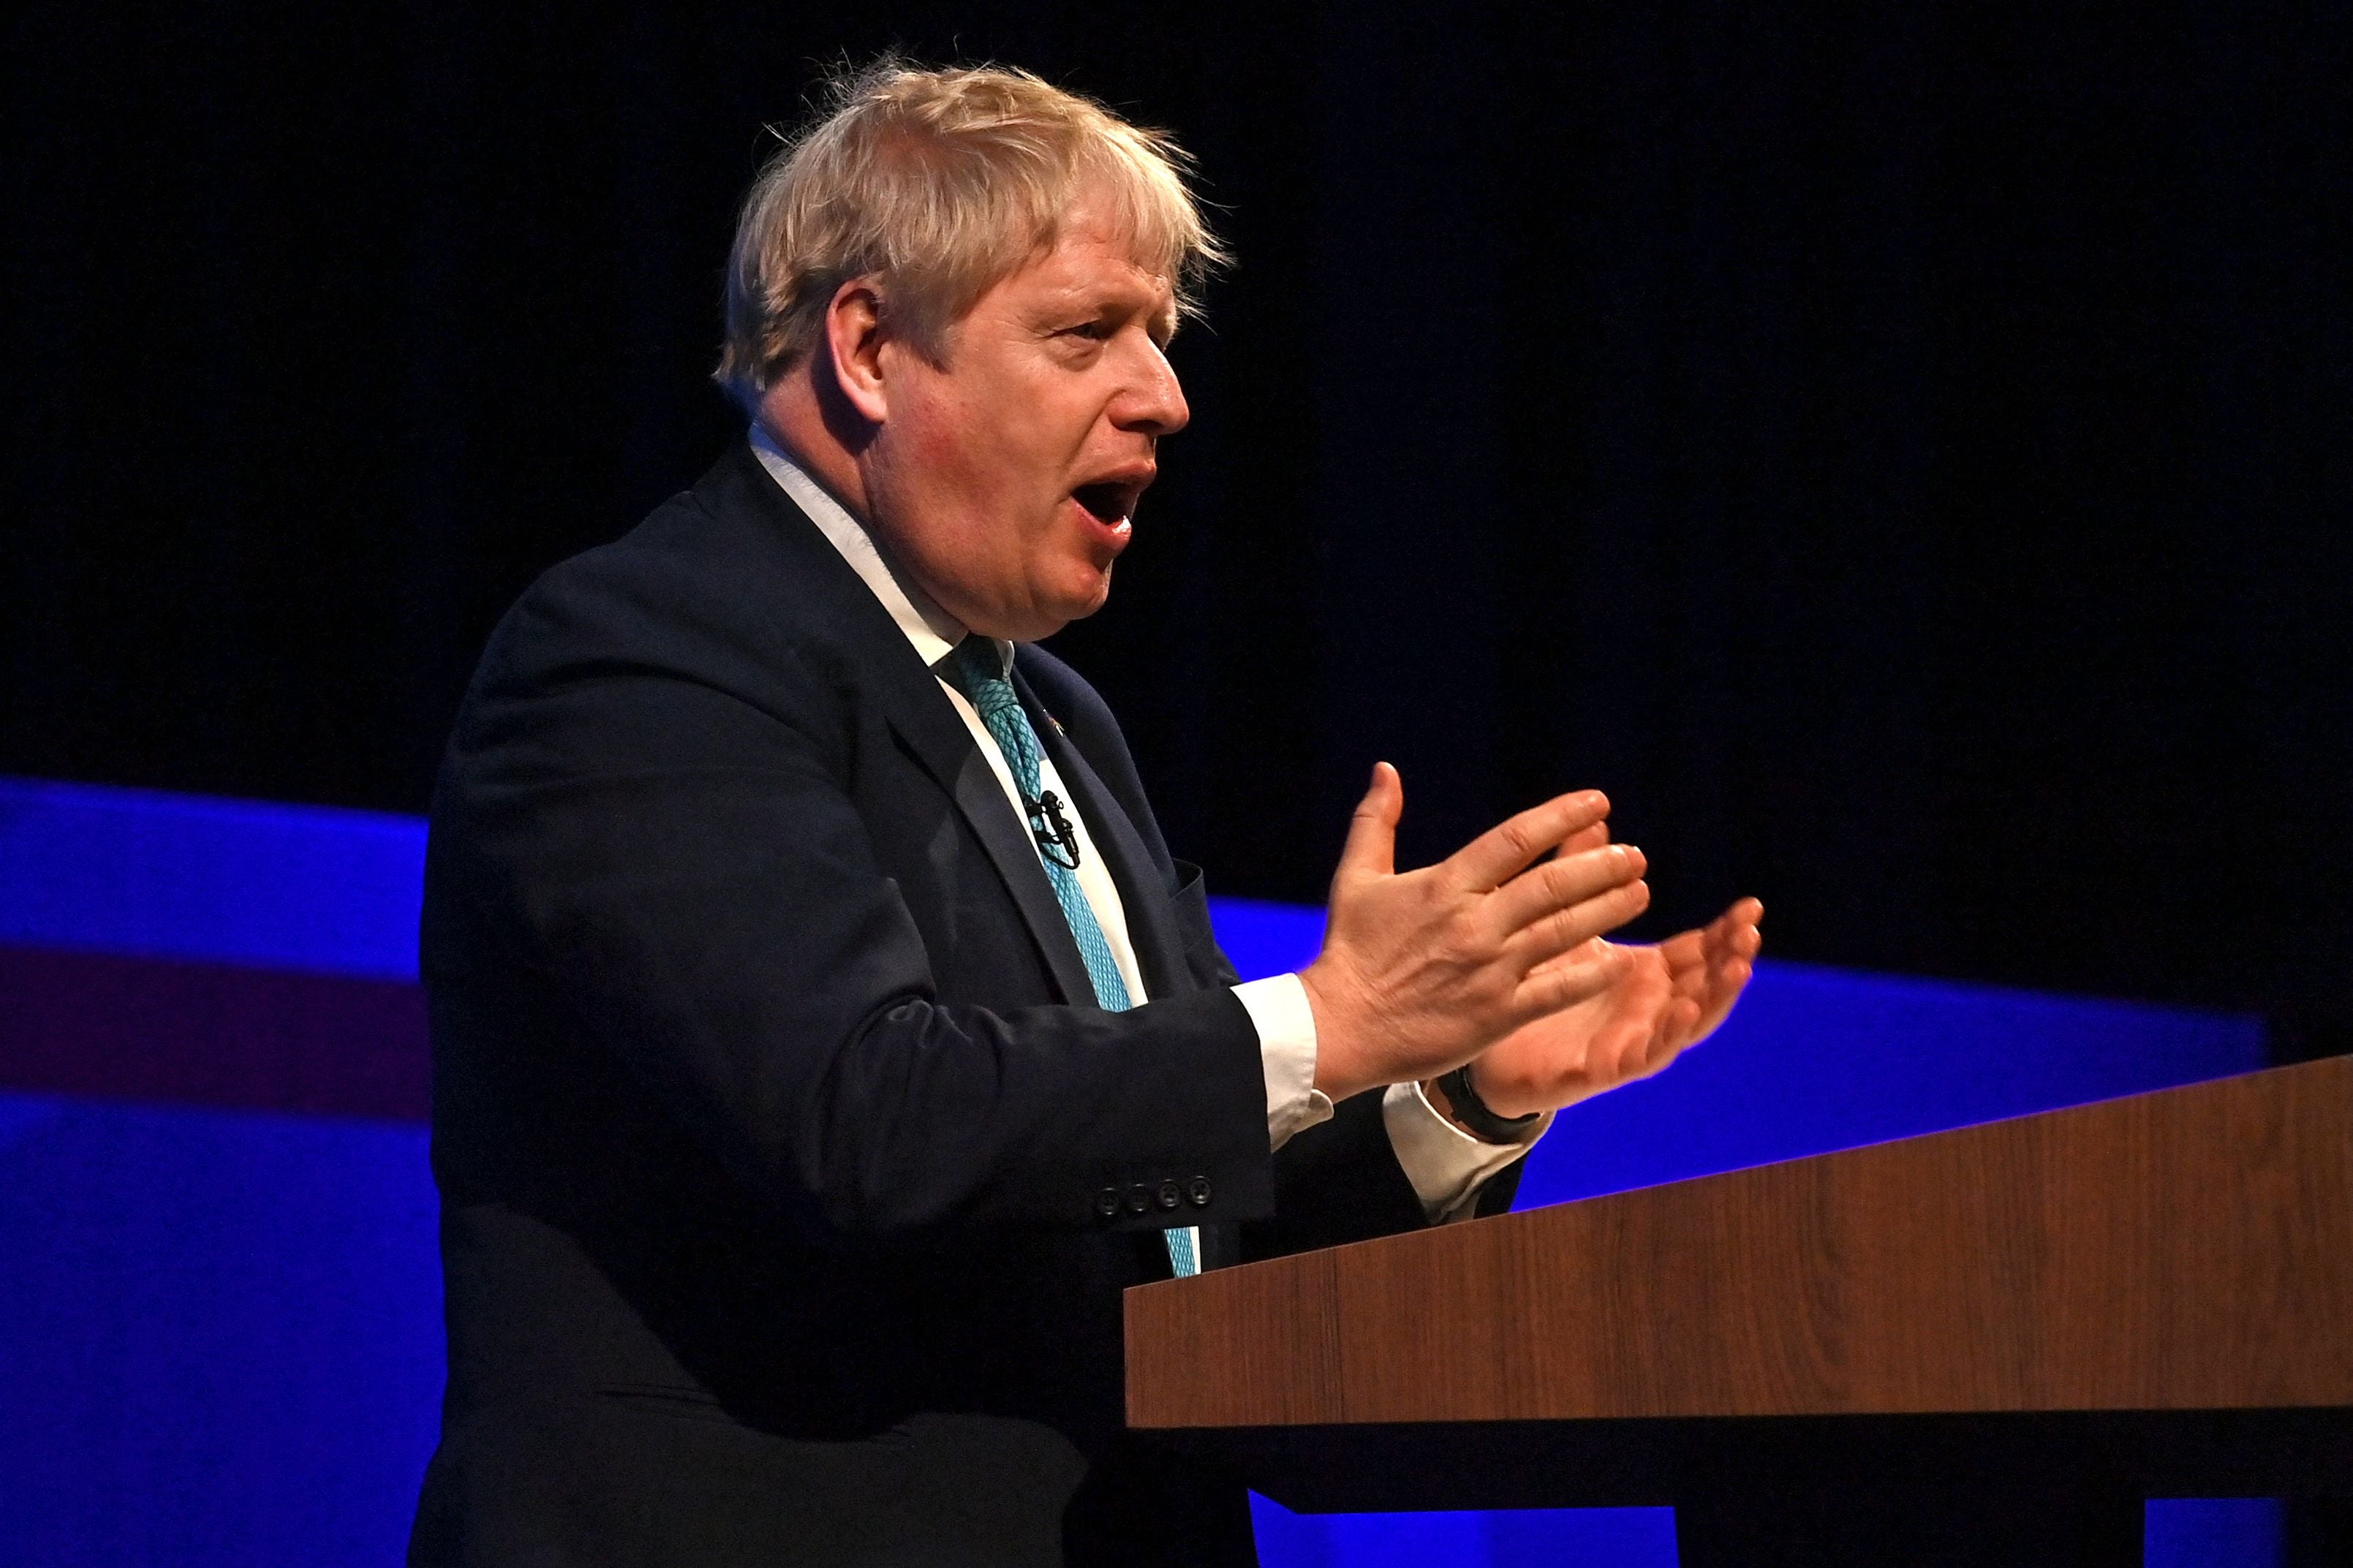 Britain’s Prime Minister Boris Johnson speaks during the Conservative Party Spring Conference at Blackpool Winter Gardens in Blackpool, north-west England, on 19 March 2022